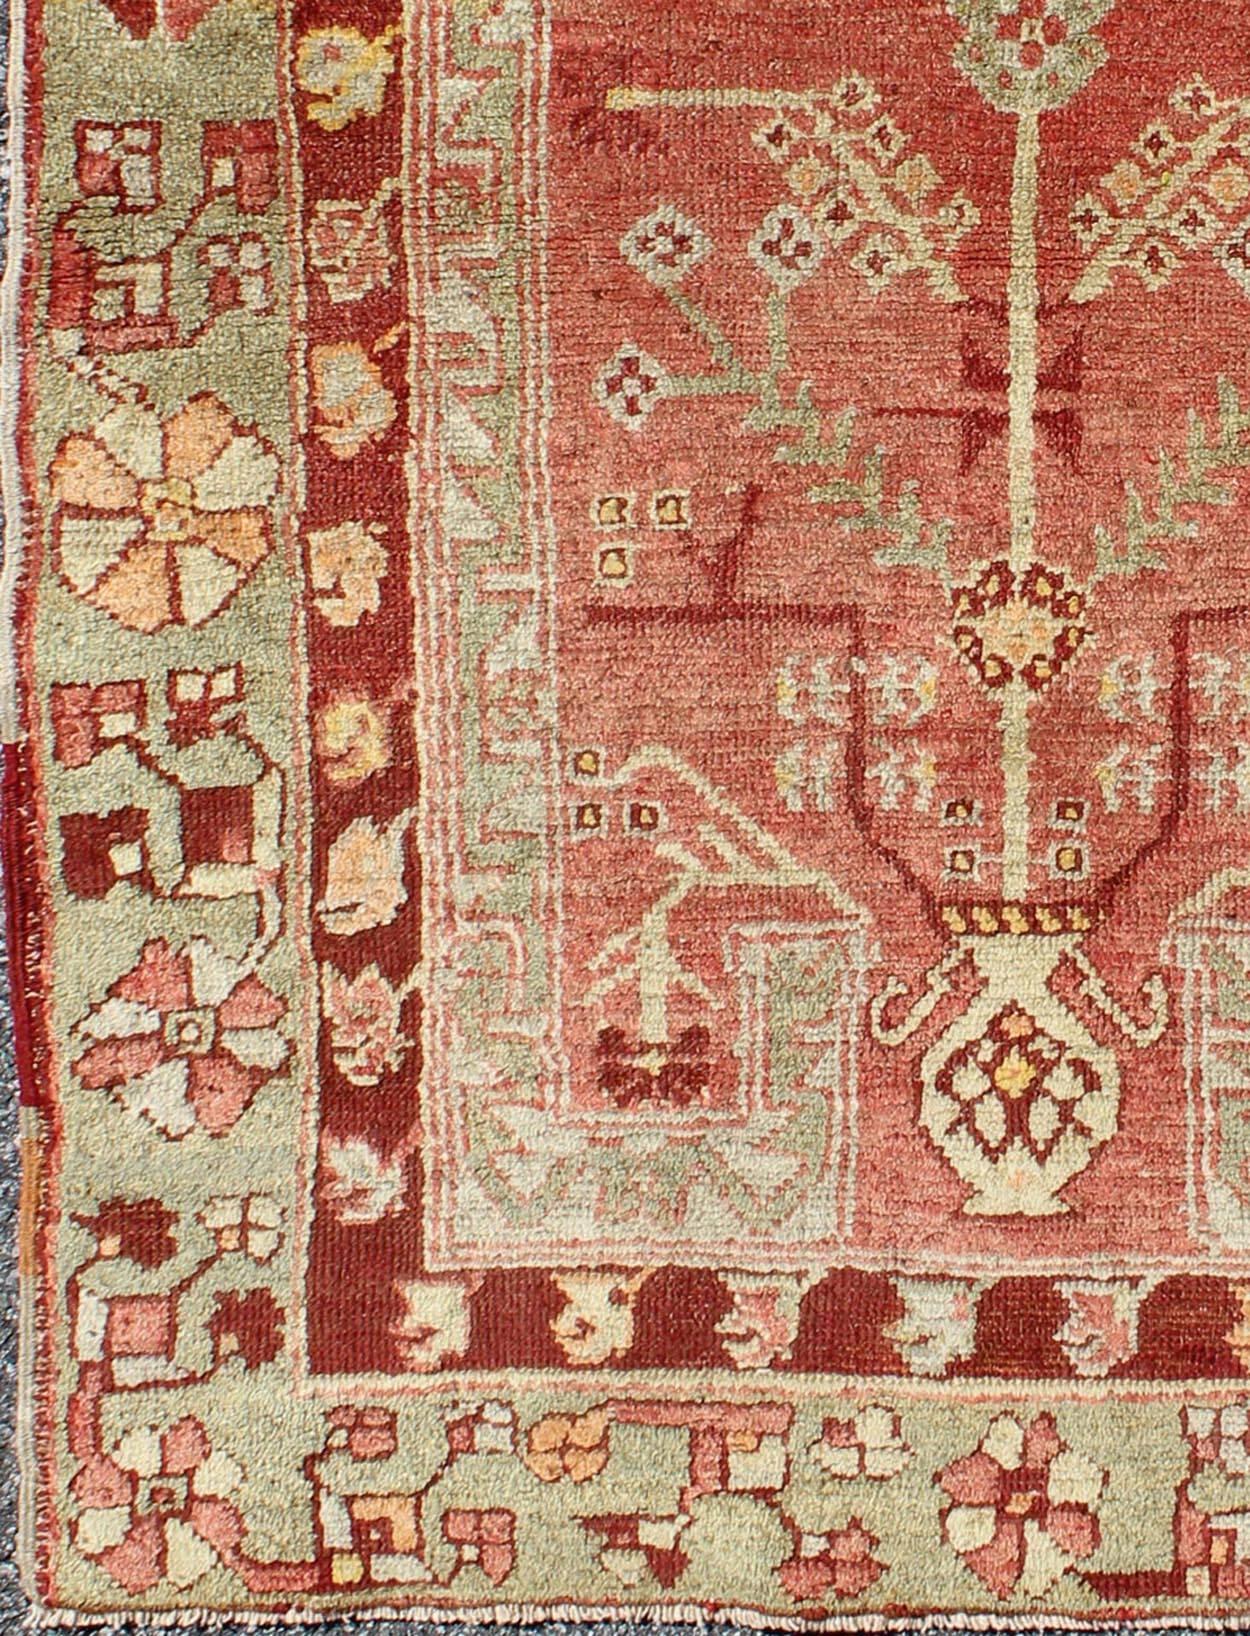 Antique Oushak Rug From Turkey With Directional Tribal Motifs in Soft Pink Red, Green.     

Antique Oushak Rug Turkey with Tree and Stems, geometric border & Tribal Motifs  Keivan Woven Arts/rug/TU-EYP-1,  origin/Turkey, Circa, 1910's 

Measures: